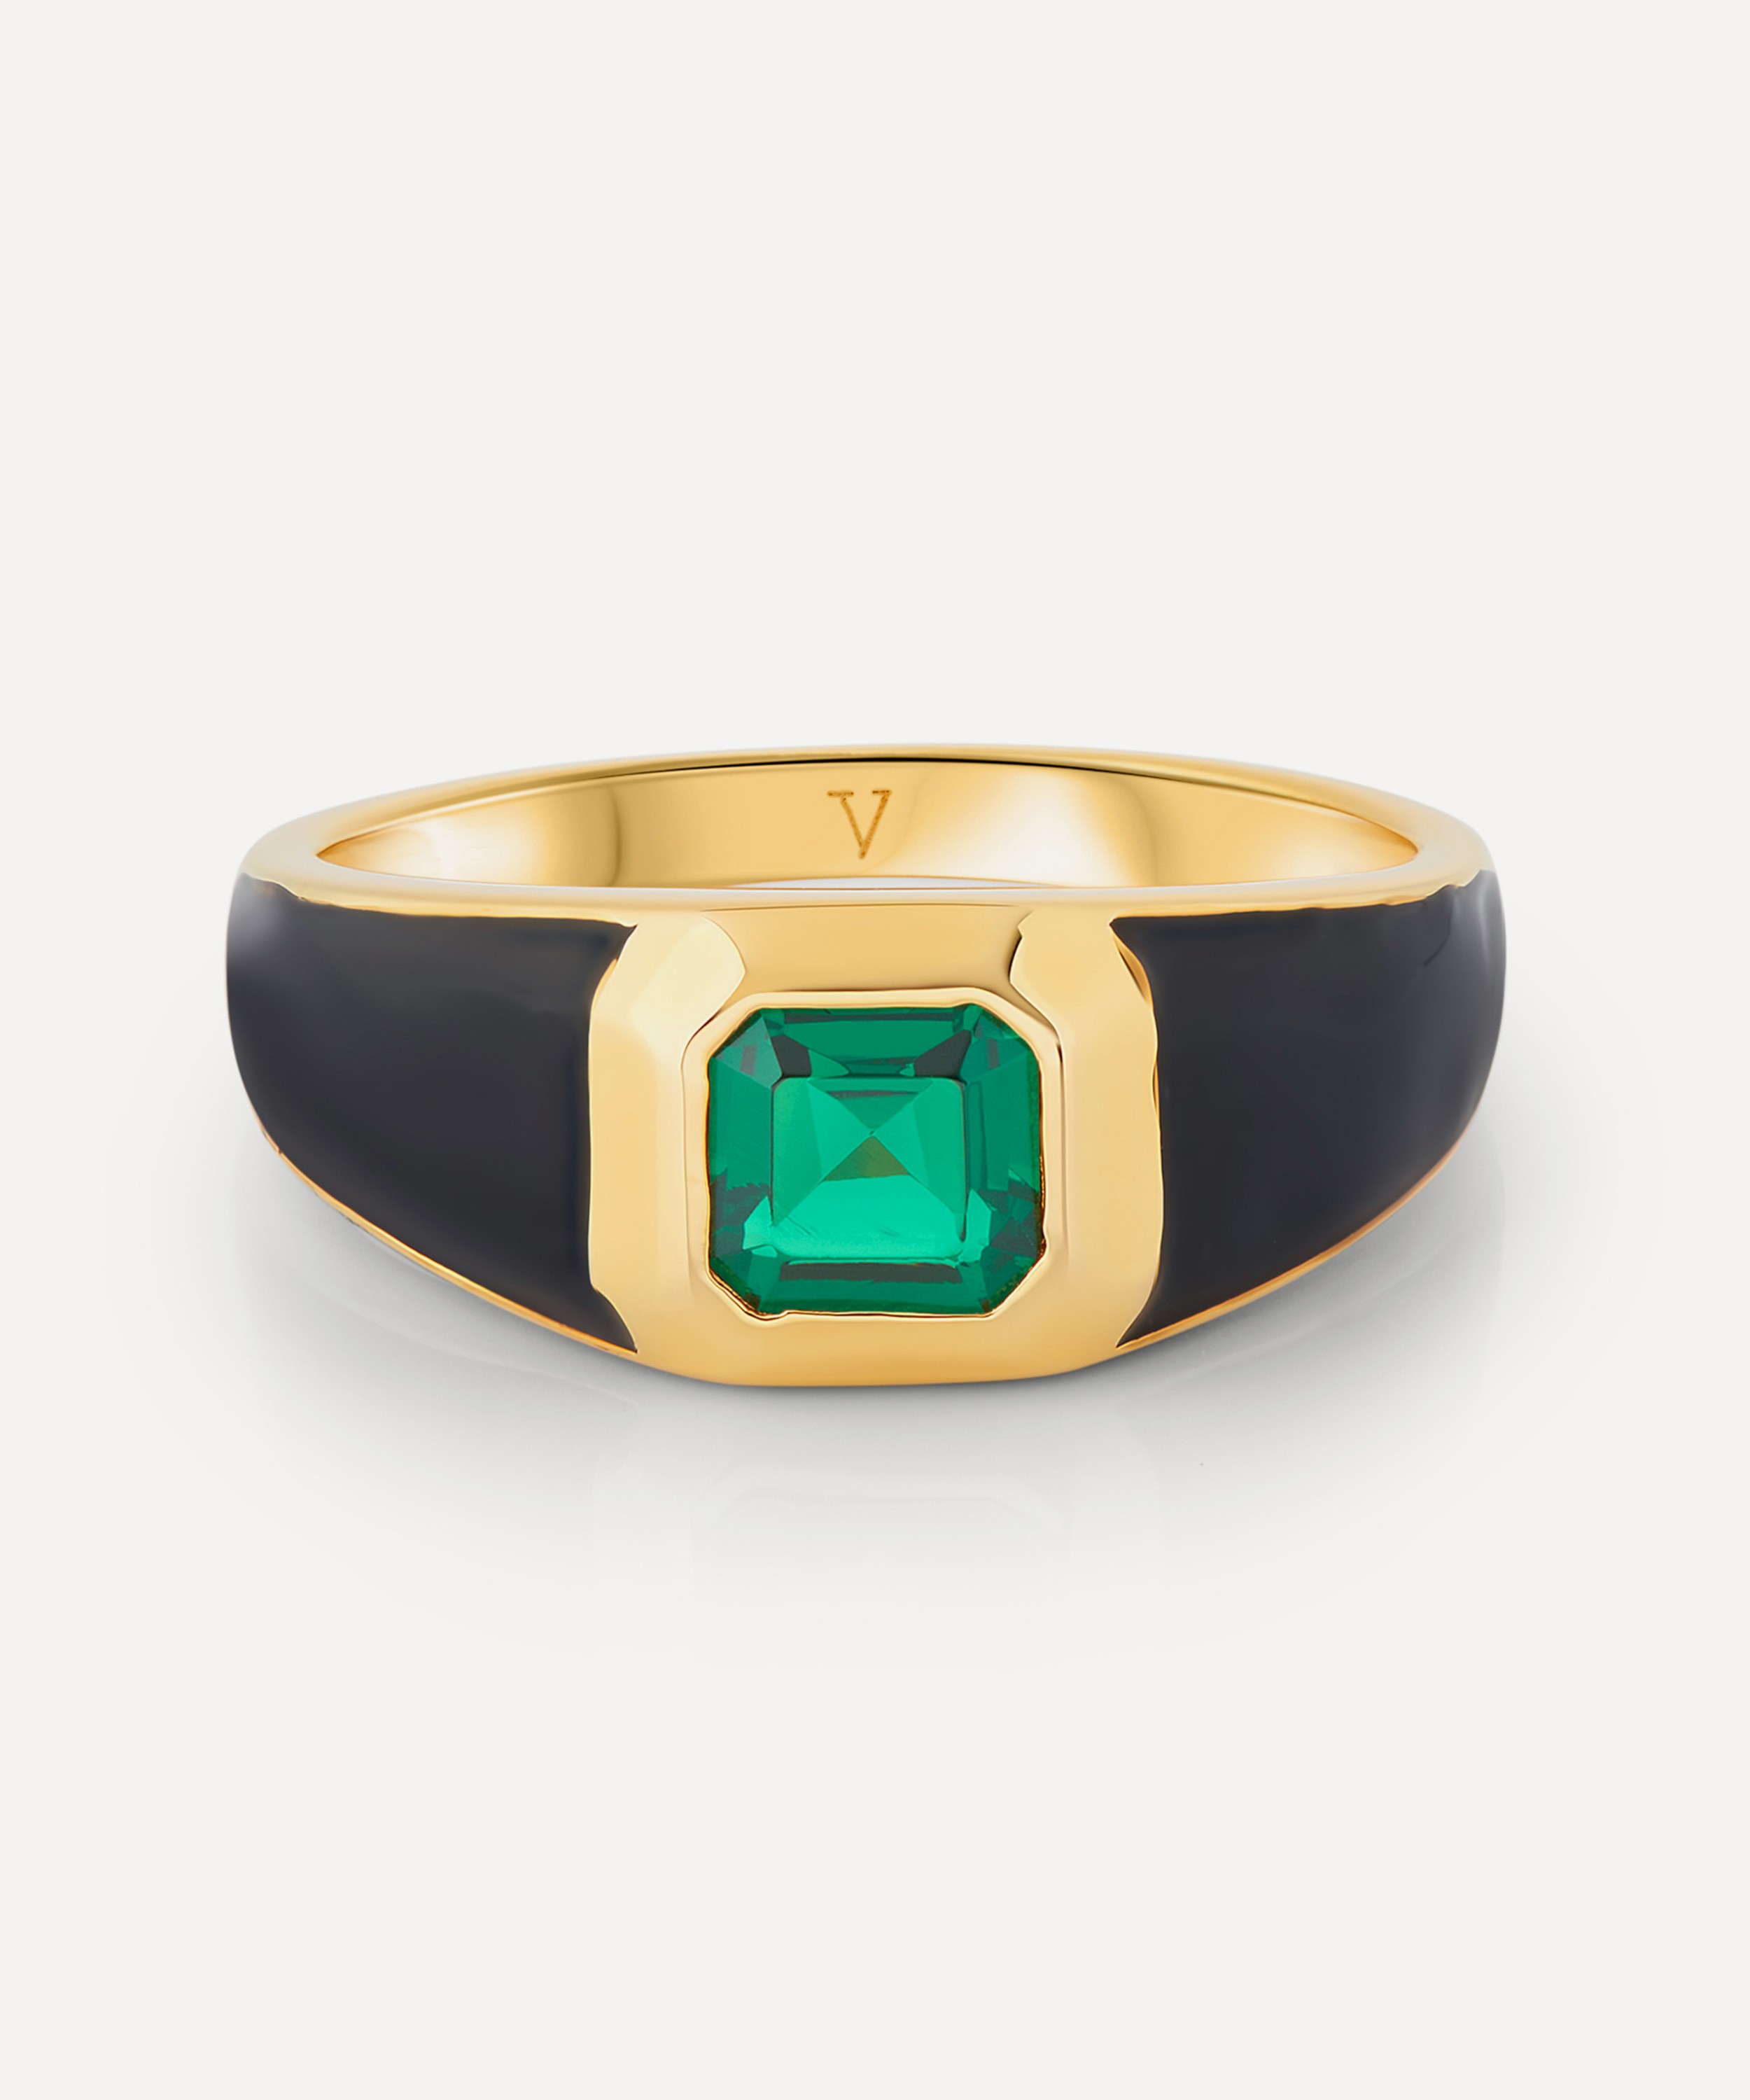 V by Laura Vann - 18ct Gold-Plated Vermeil Silver Sophie Black Enamel and Emerald Signet Ring